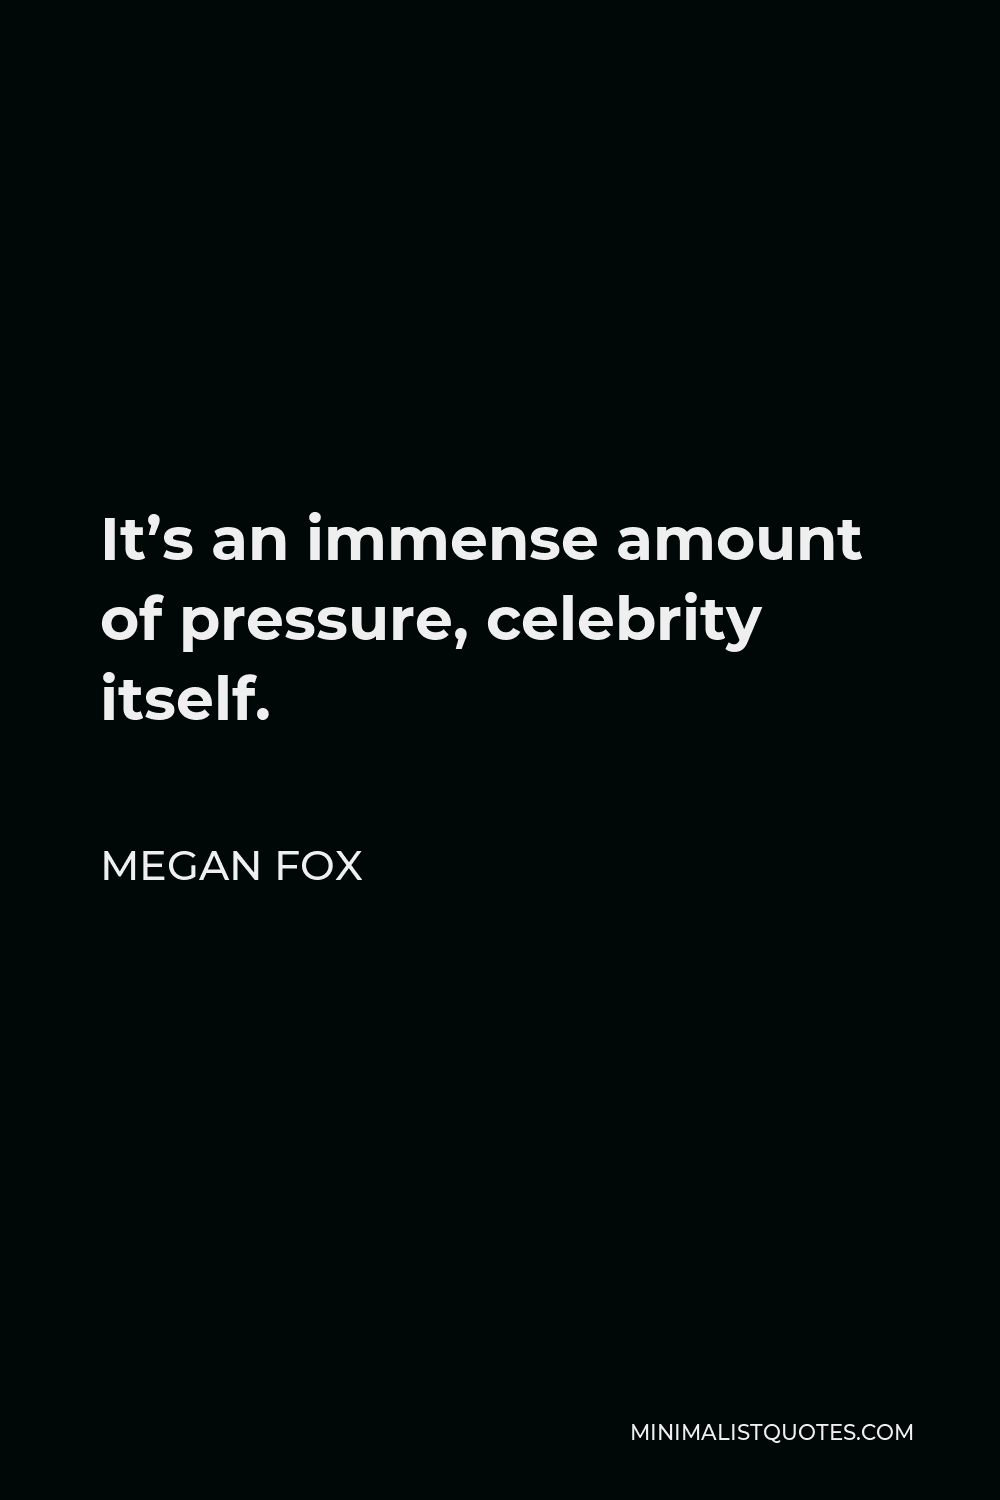 Megan Fox Quote - It’s an immense amount of pressure, celebrity itself.